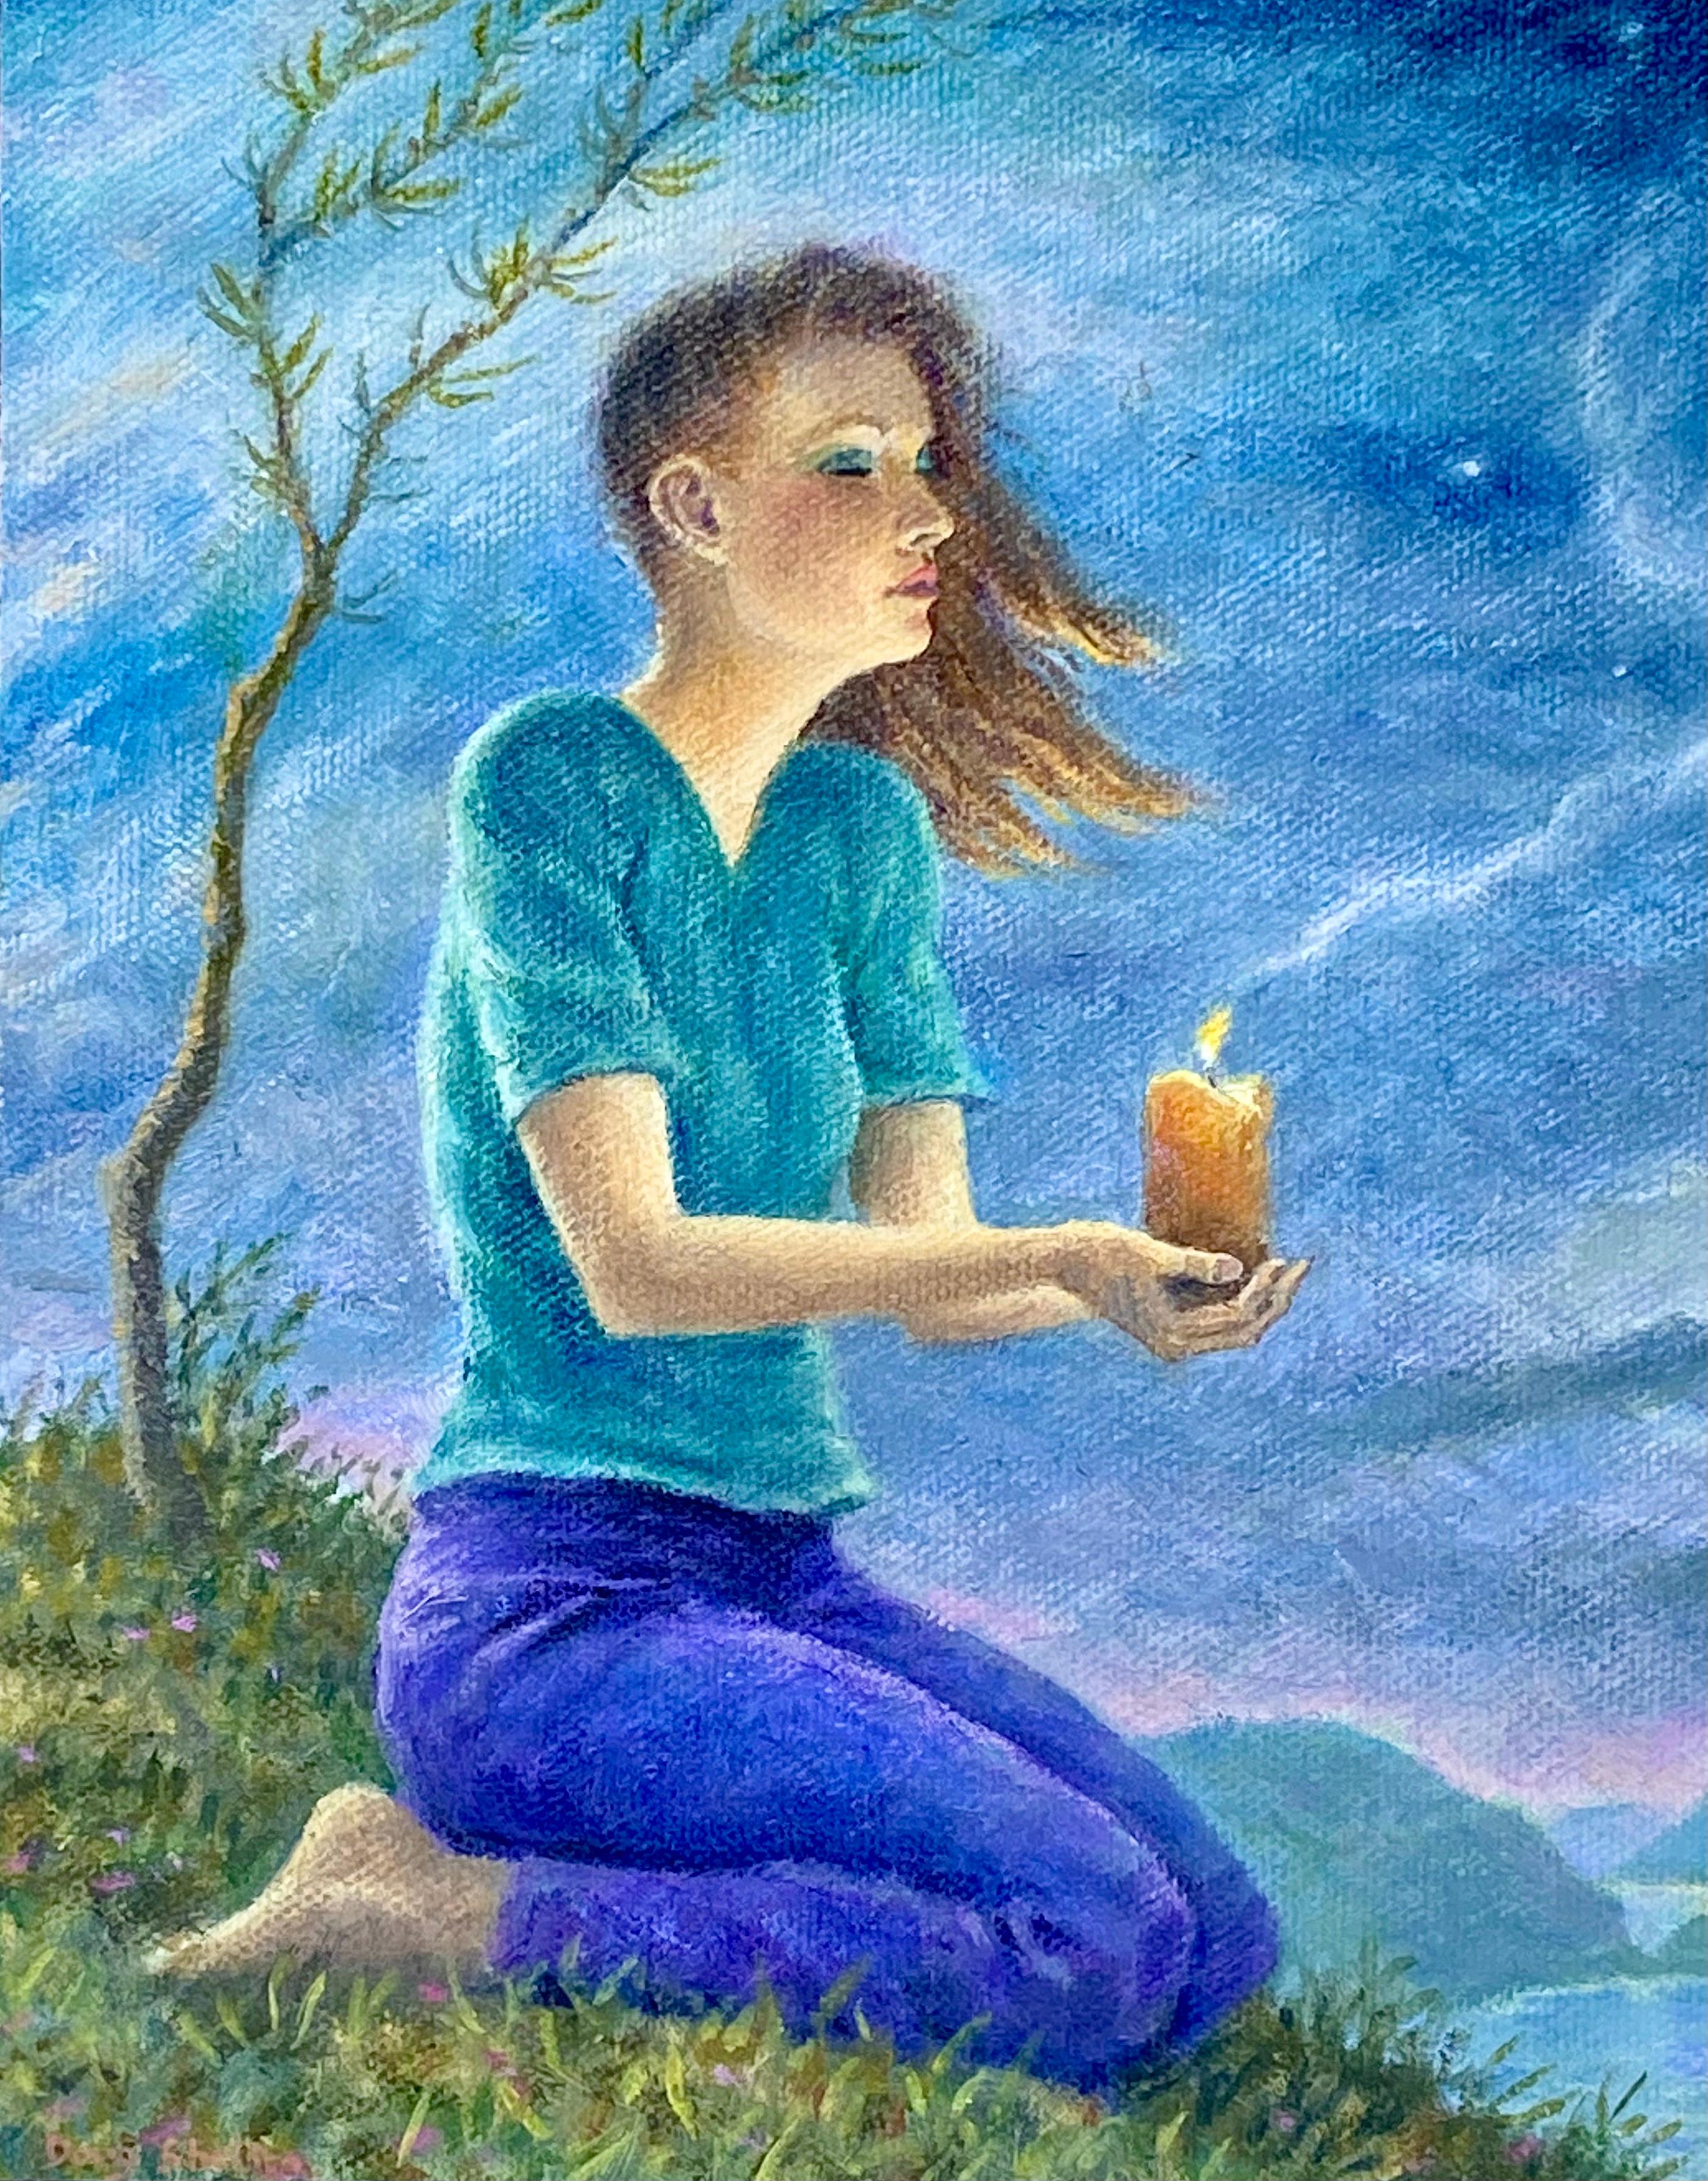 A woman sits on her knees on a hill near a body of water. She wears a teal shirt and purple pants. Her hair blows gently in the breeze. She is holding a small candle, and a thin tree stands behind her. Night is falling in the background as the moon